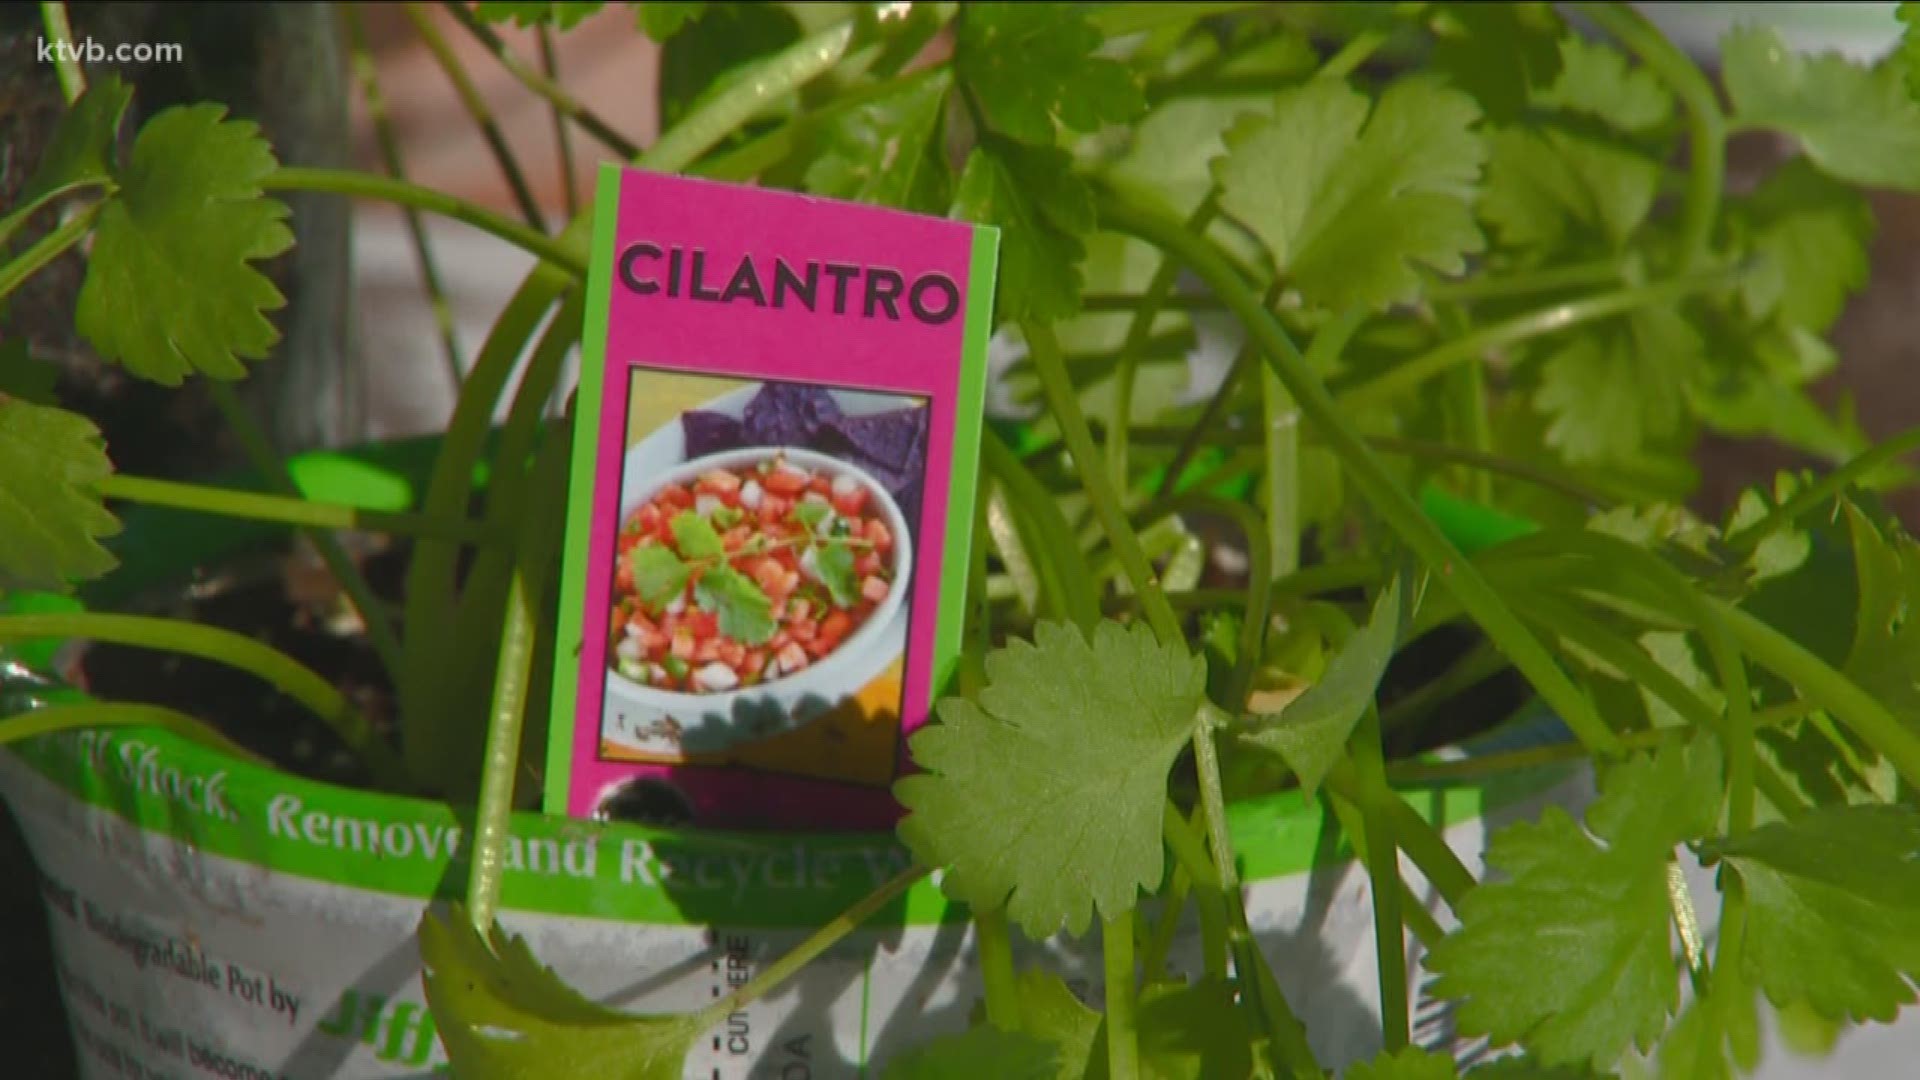 Jim Duthie shows us several other kinds of herbs that would be great to have right outside your kitchen door.